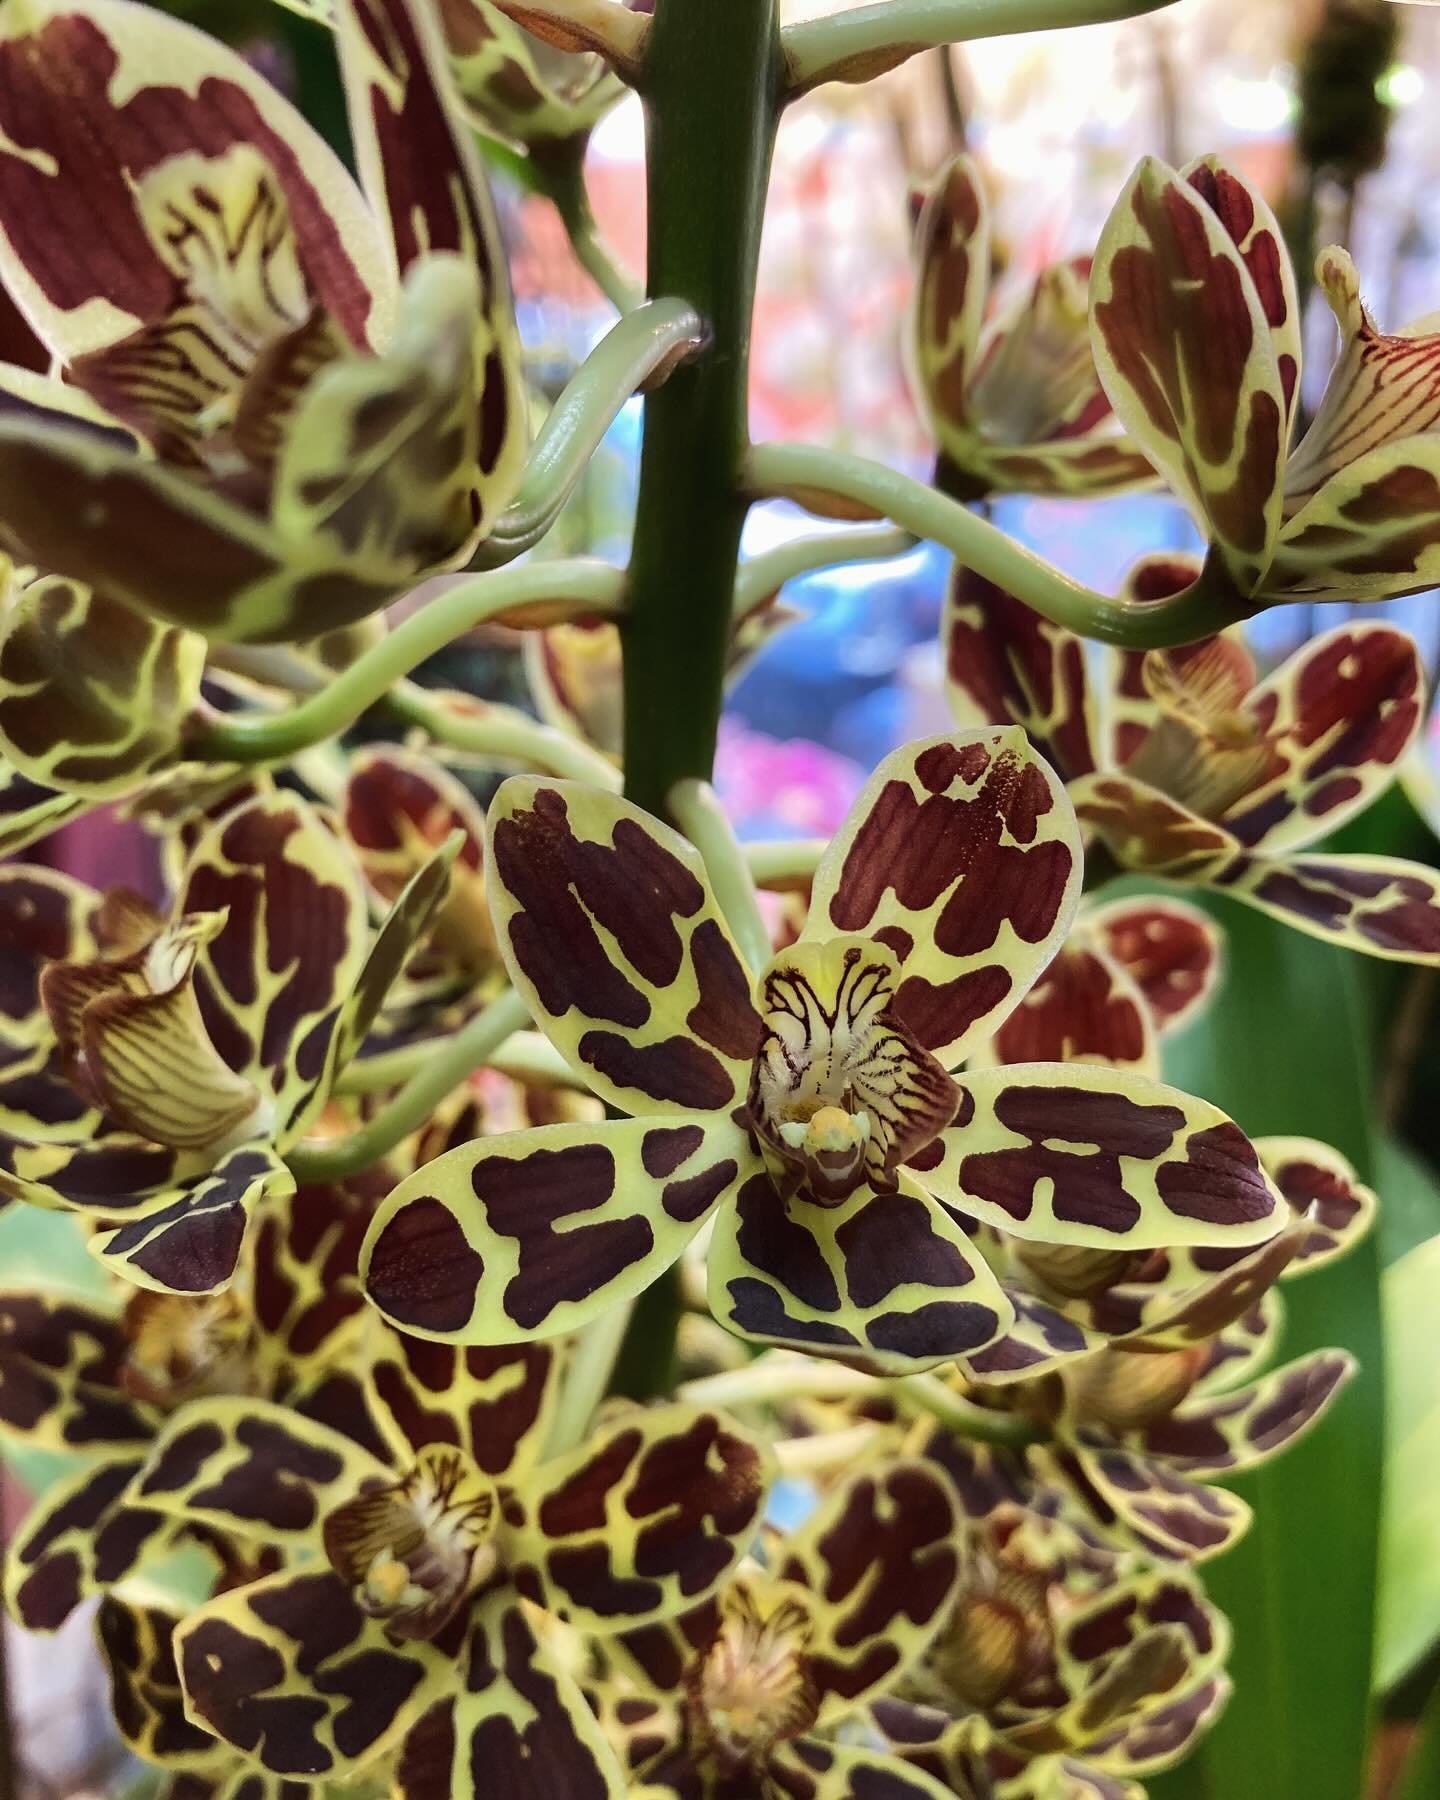 Leopard pattern Grammatophyllum Orchids are blooming in our shop! Don&rsquo;t miss out on this week&rsquo;s special arrivals from Hawaii